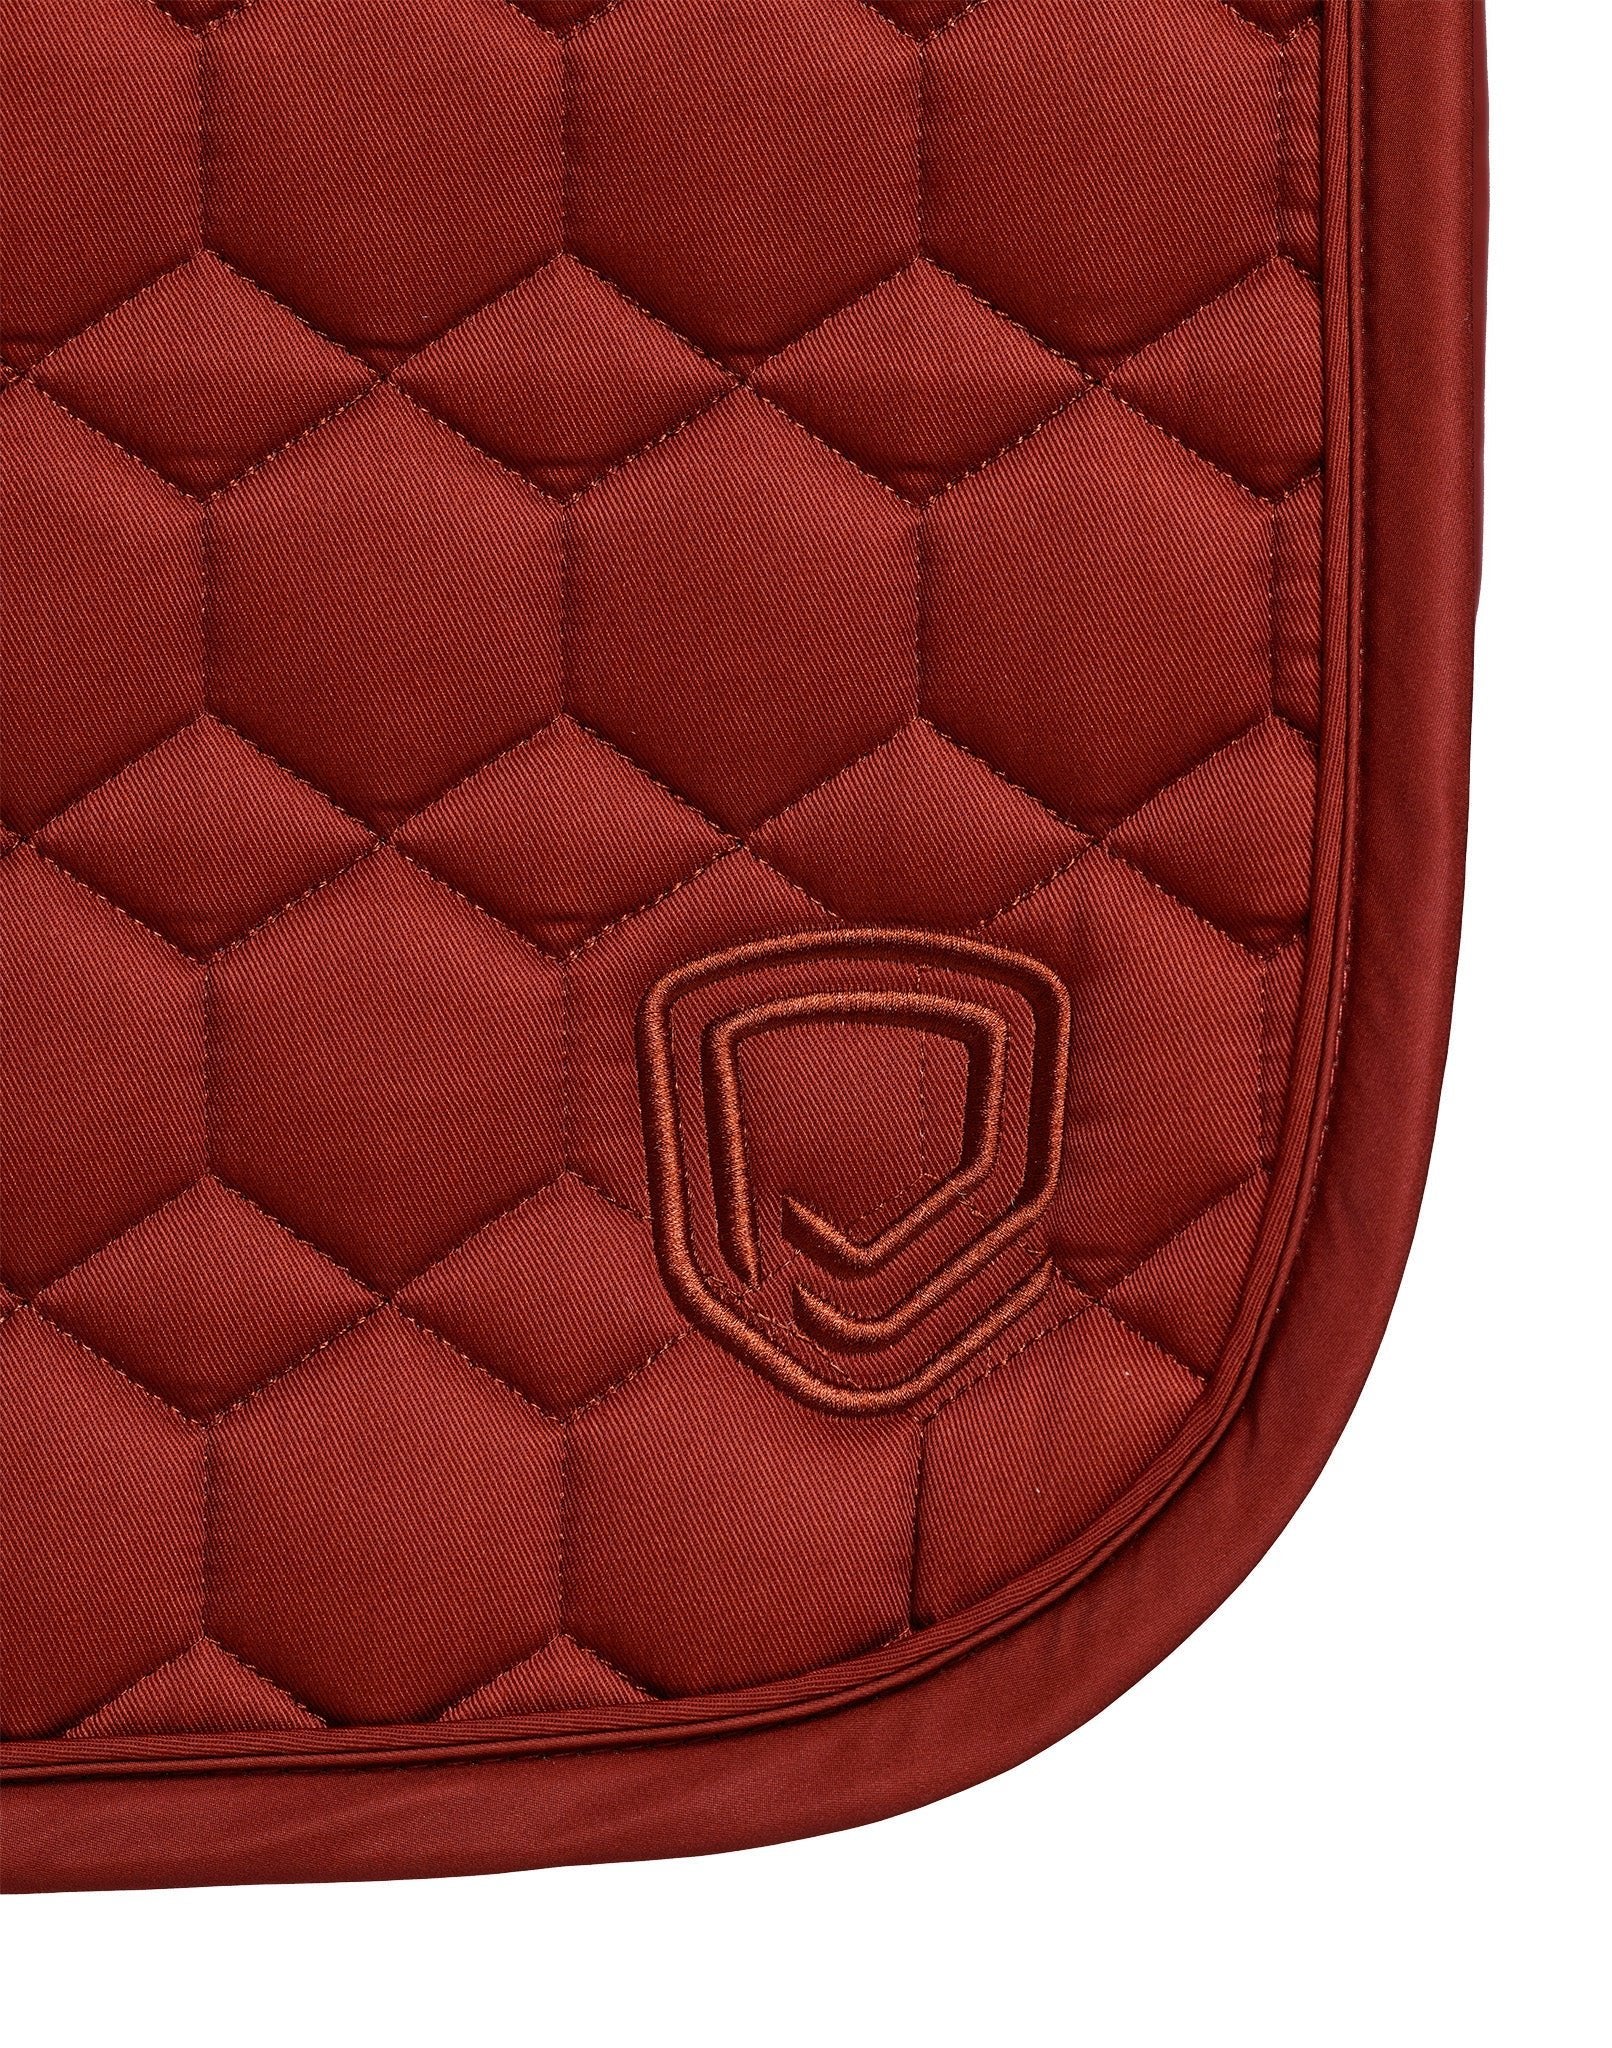 Equipad Dressage Saddle Pad - Henna Red - Equiluxe Tack